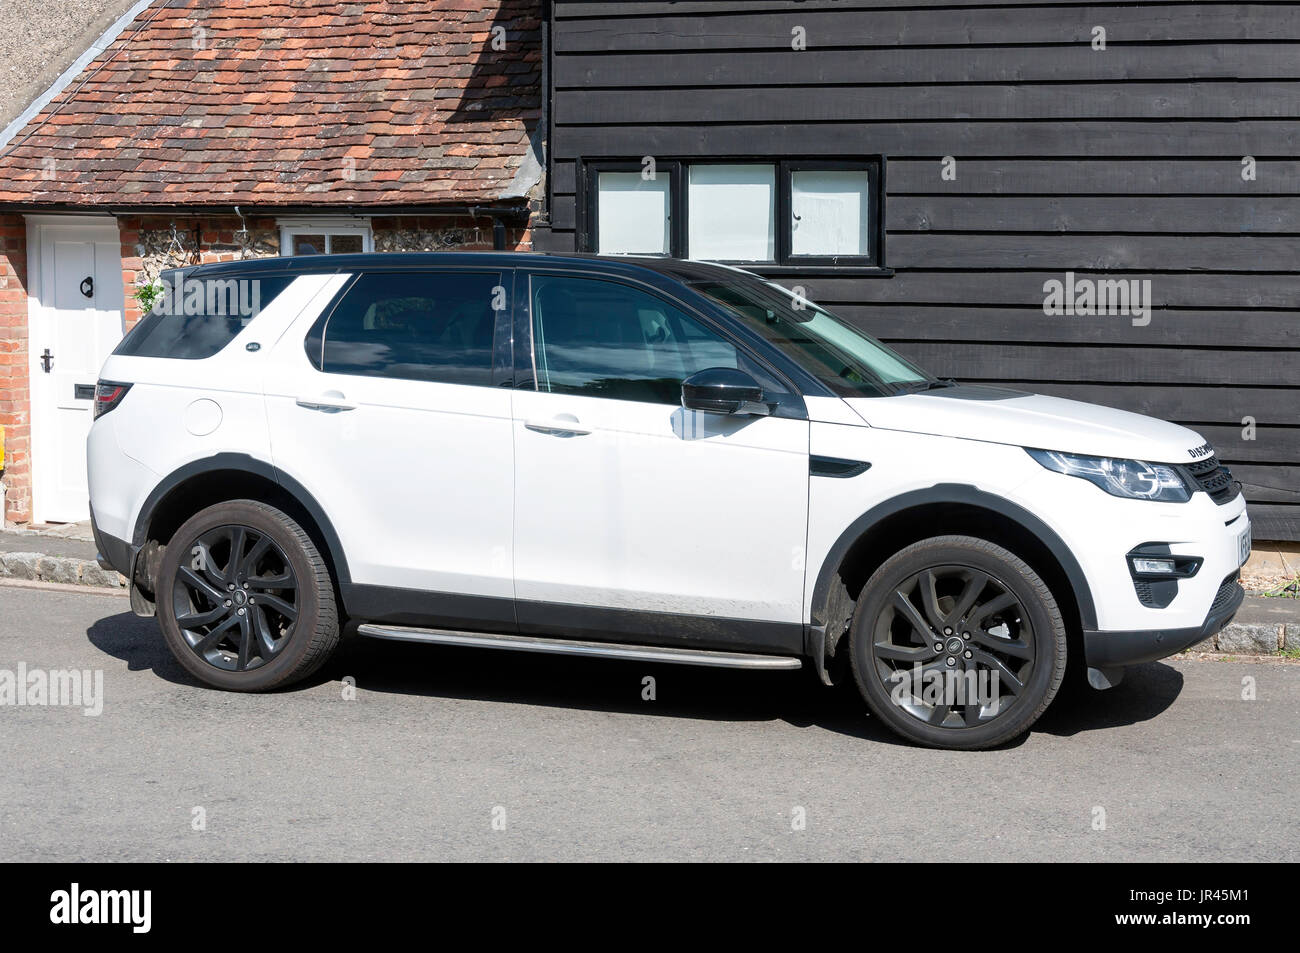 White Range Rover Discovery veicolo sportivo, Highmore Cottages, Little Missenden, Buckinghamshire, Inghilterra, Regno Unito Foto Stock